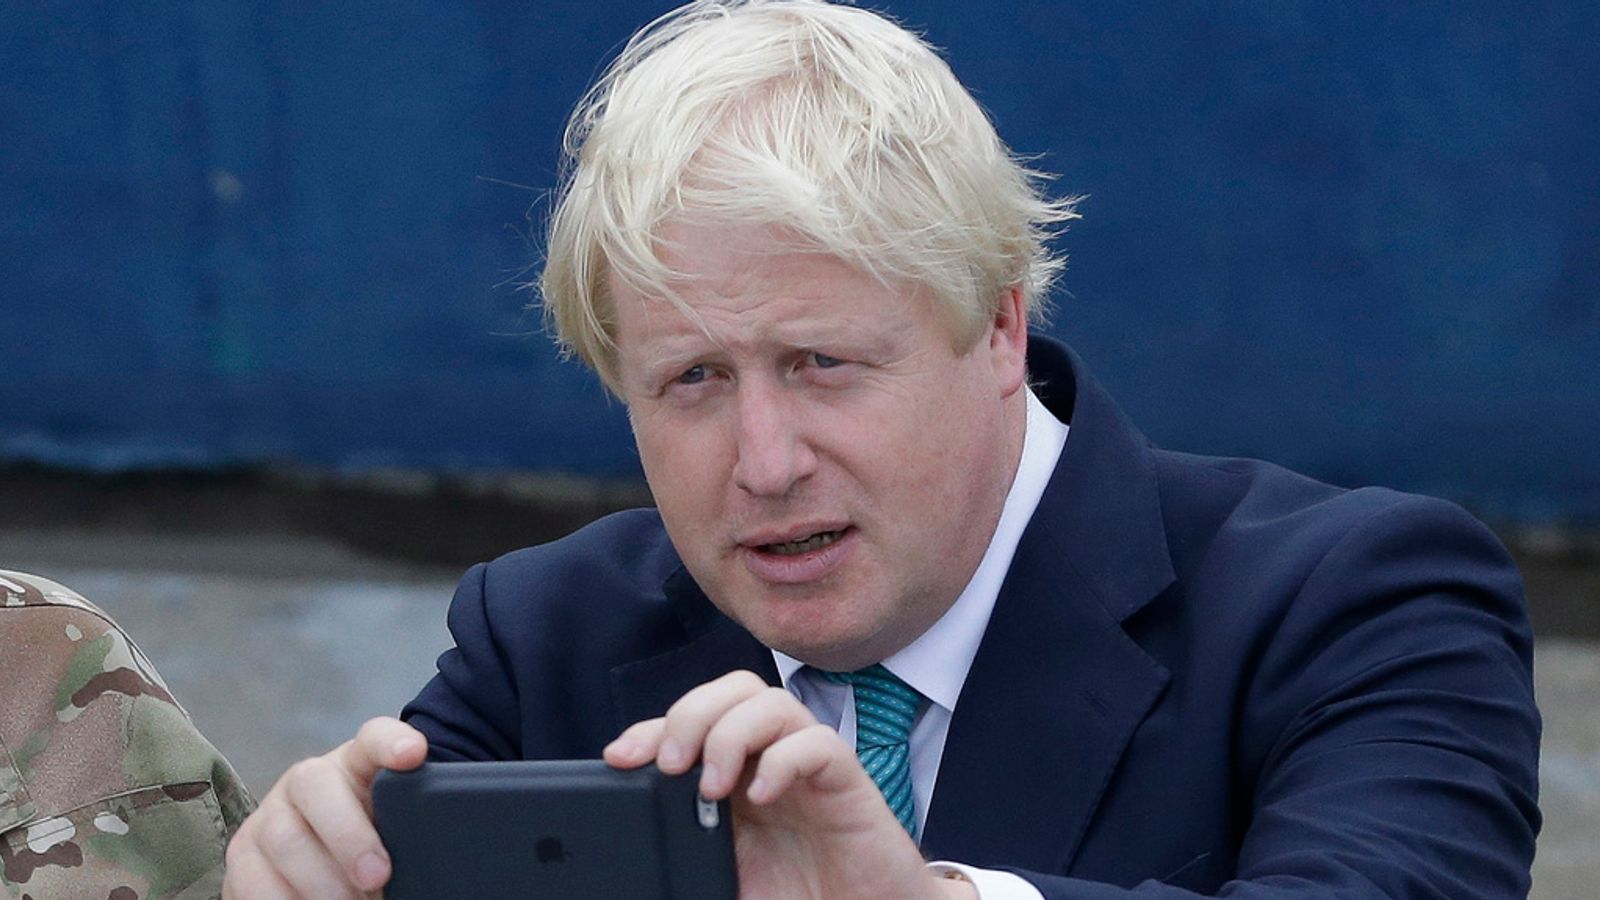 Potential breakthrough in attempts to recover WhatsApp messages from Boris Johnson's old phone